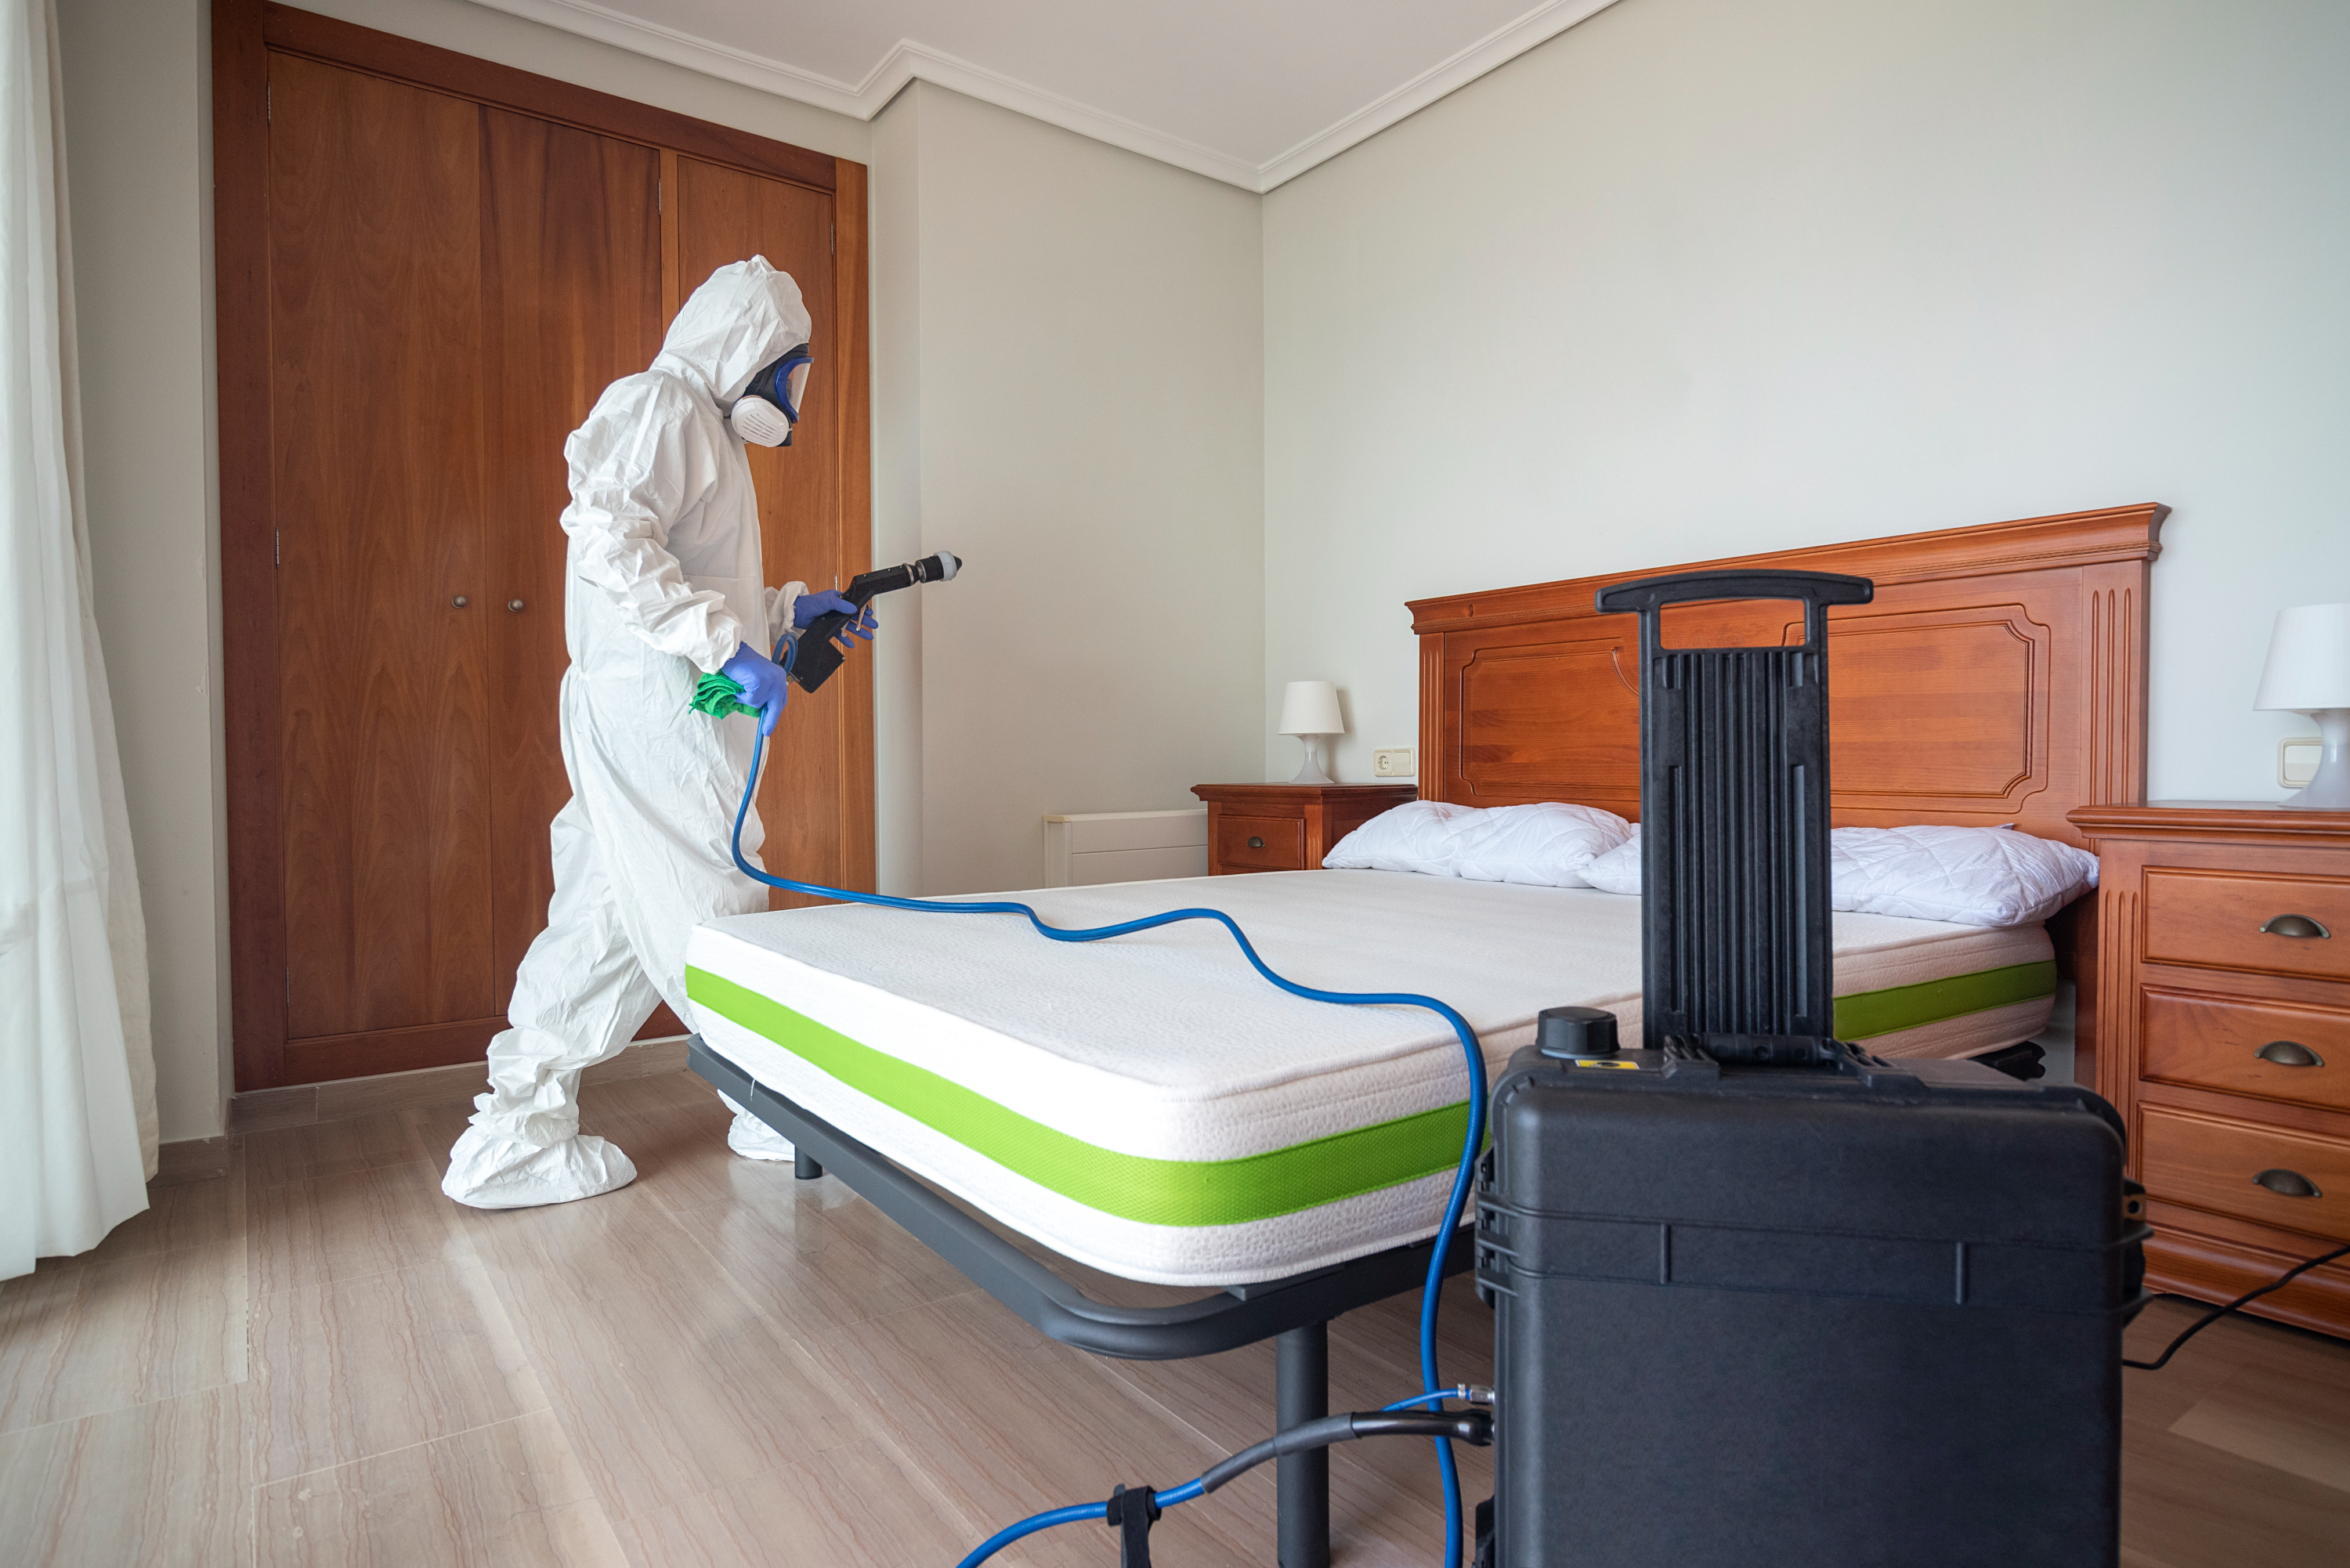 dealing with beg bugs - Bed Bugs Pest Control